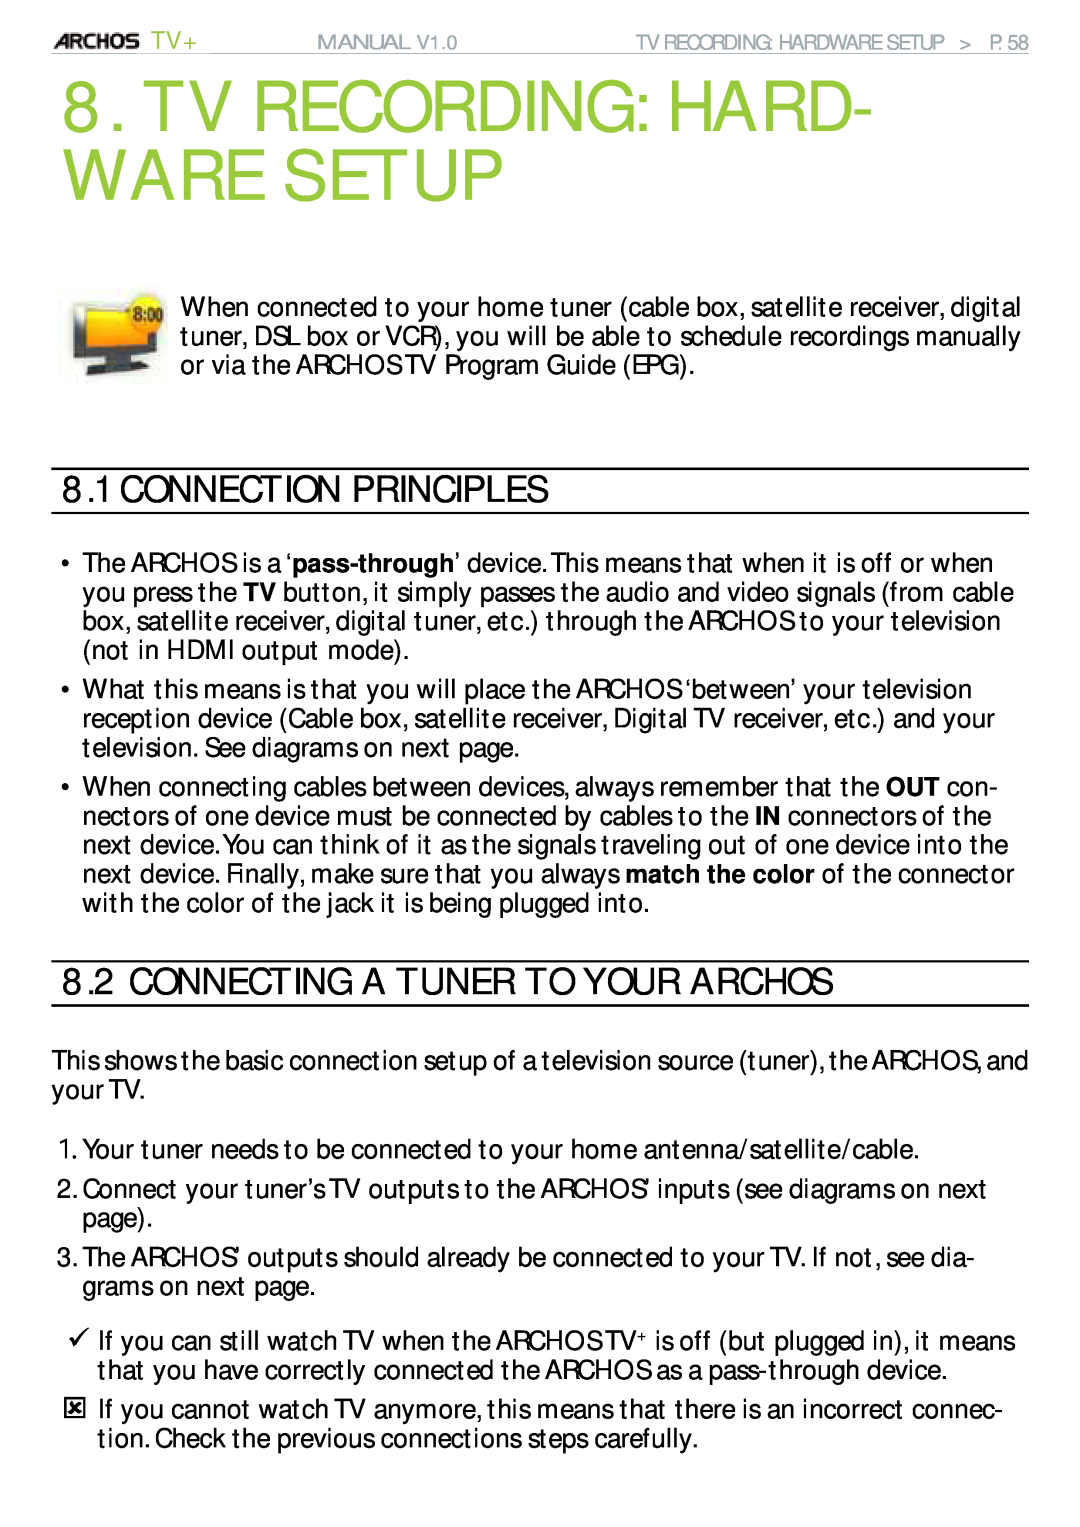 Archos 500973 user manual Tv Recording Hard- Ware Setup, Connection Principles, Connecting A Tuner To Your Archos 